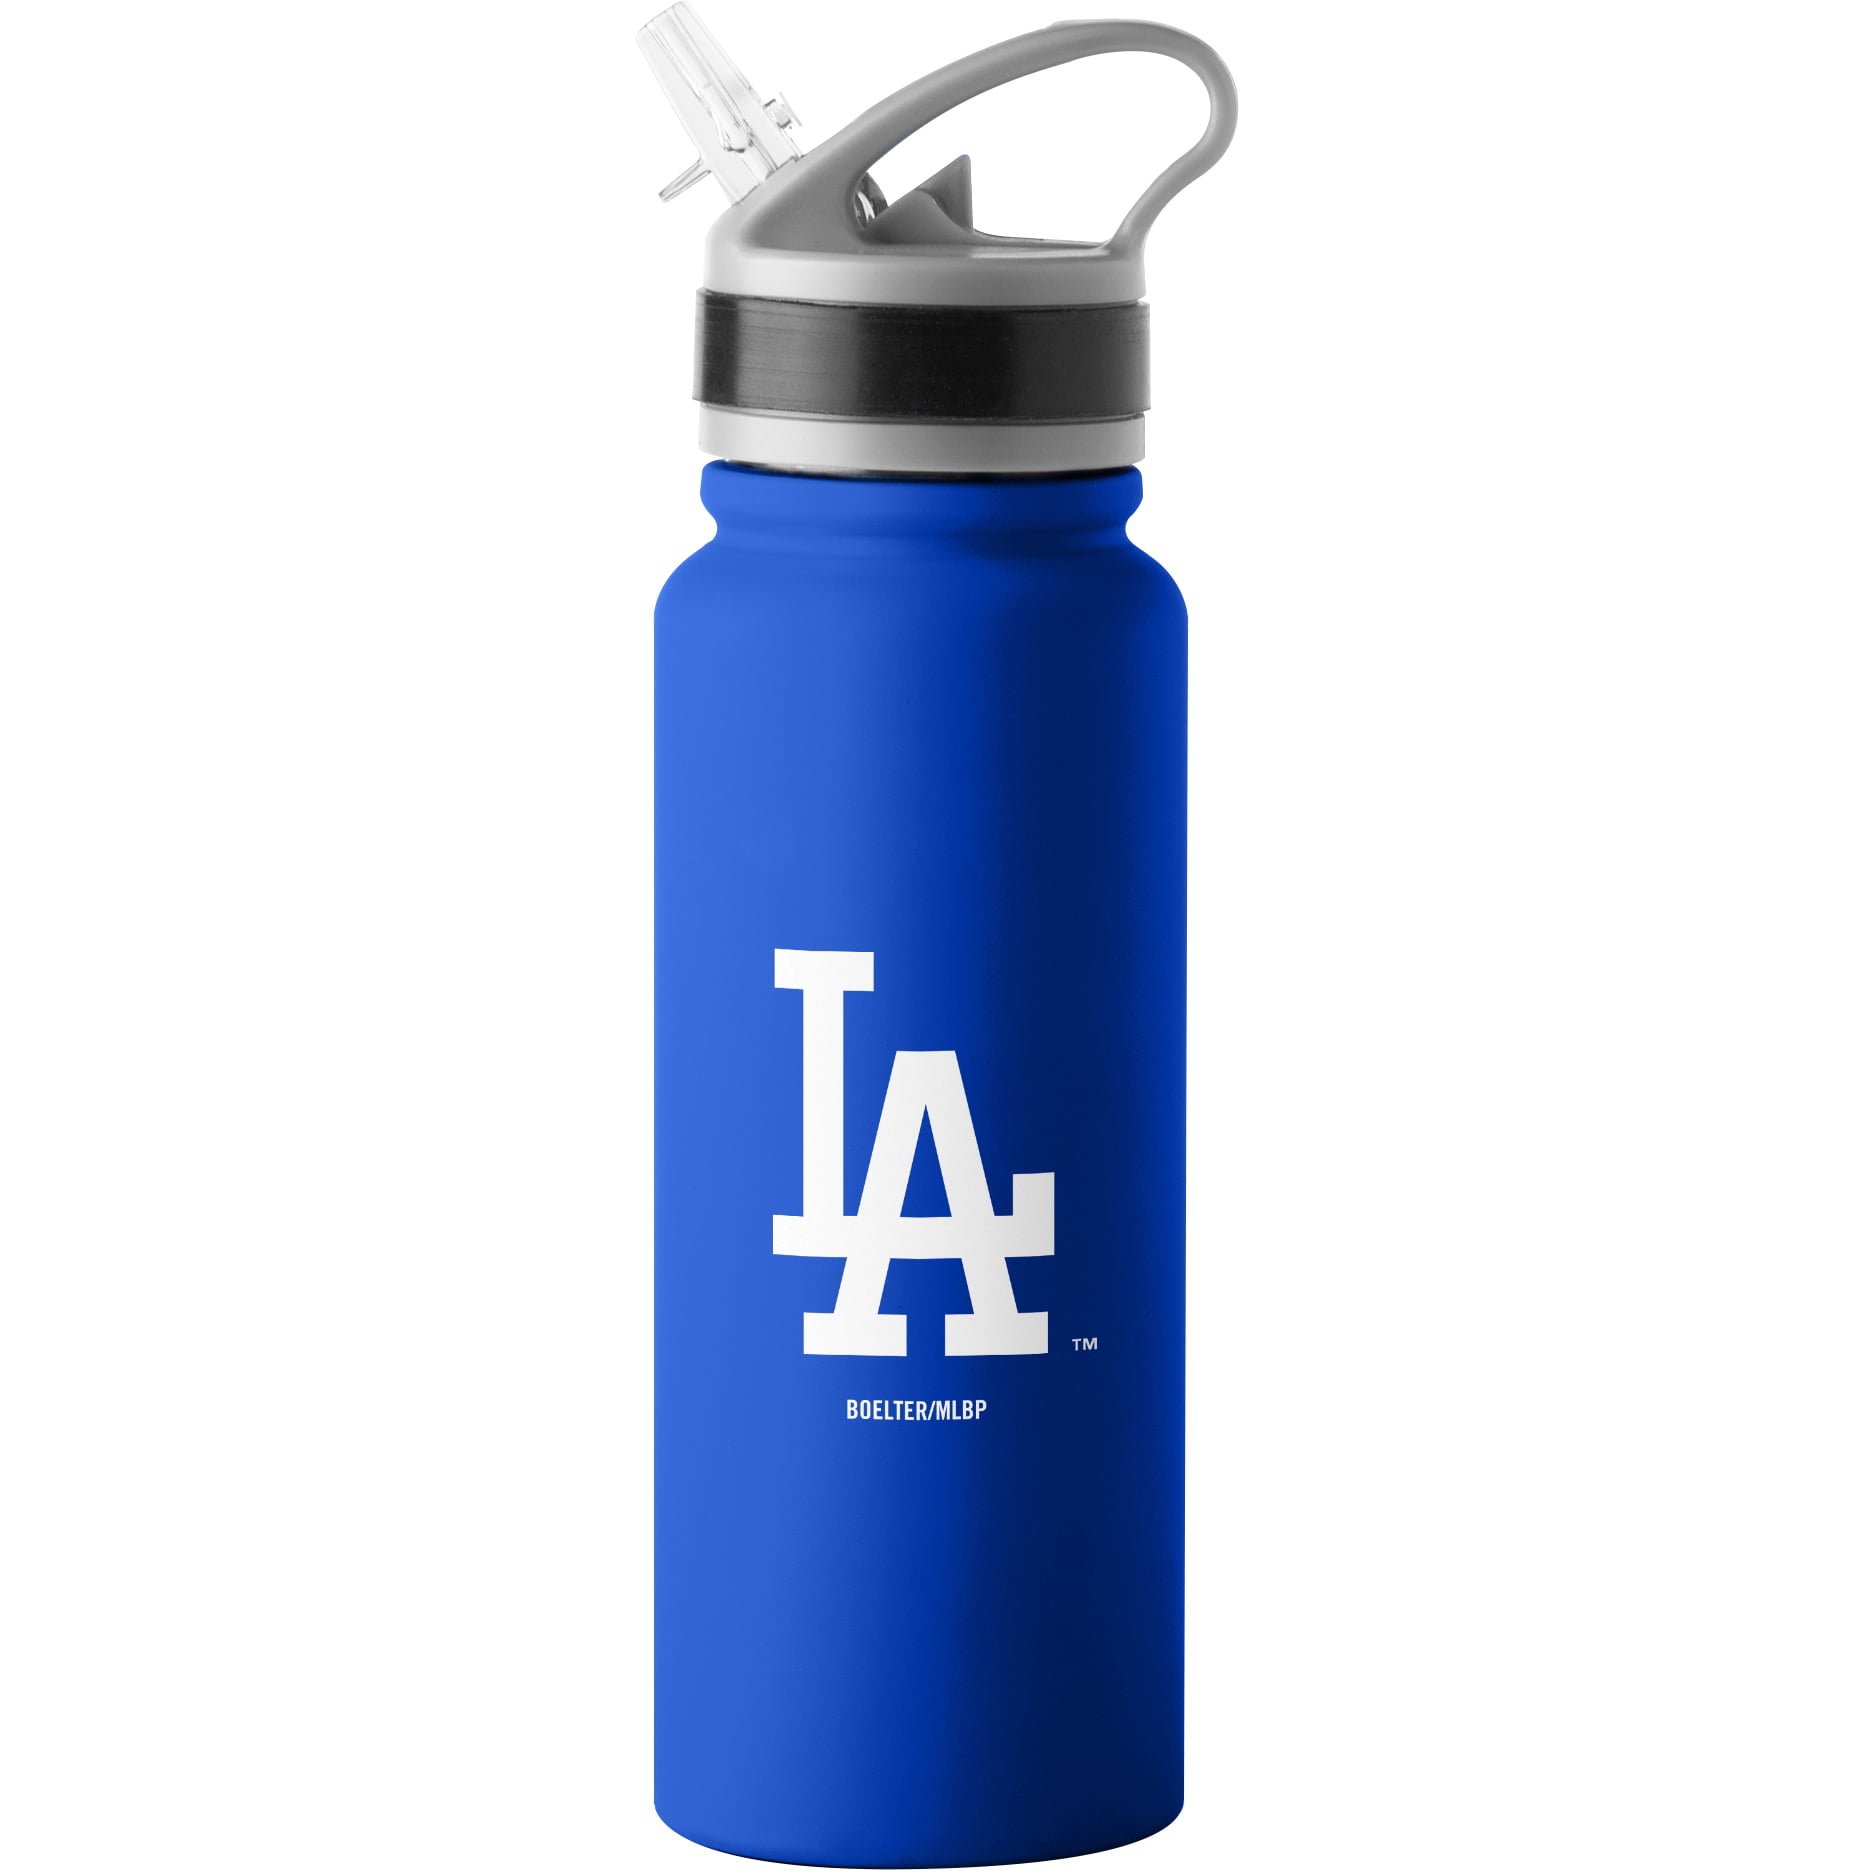 Los Angeles Dodgers 7 ounce Stainless Steel Flask